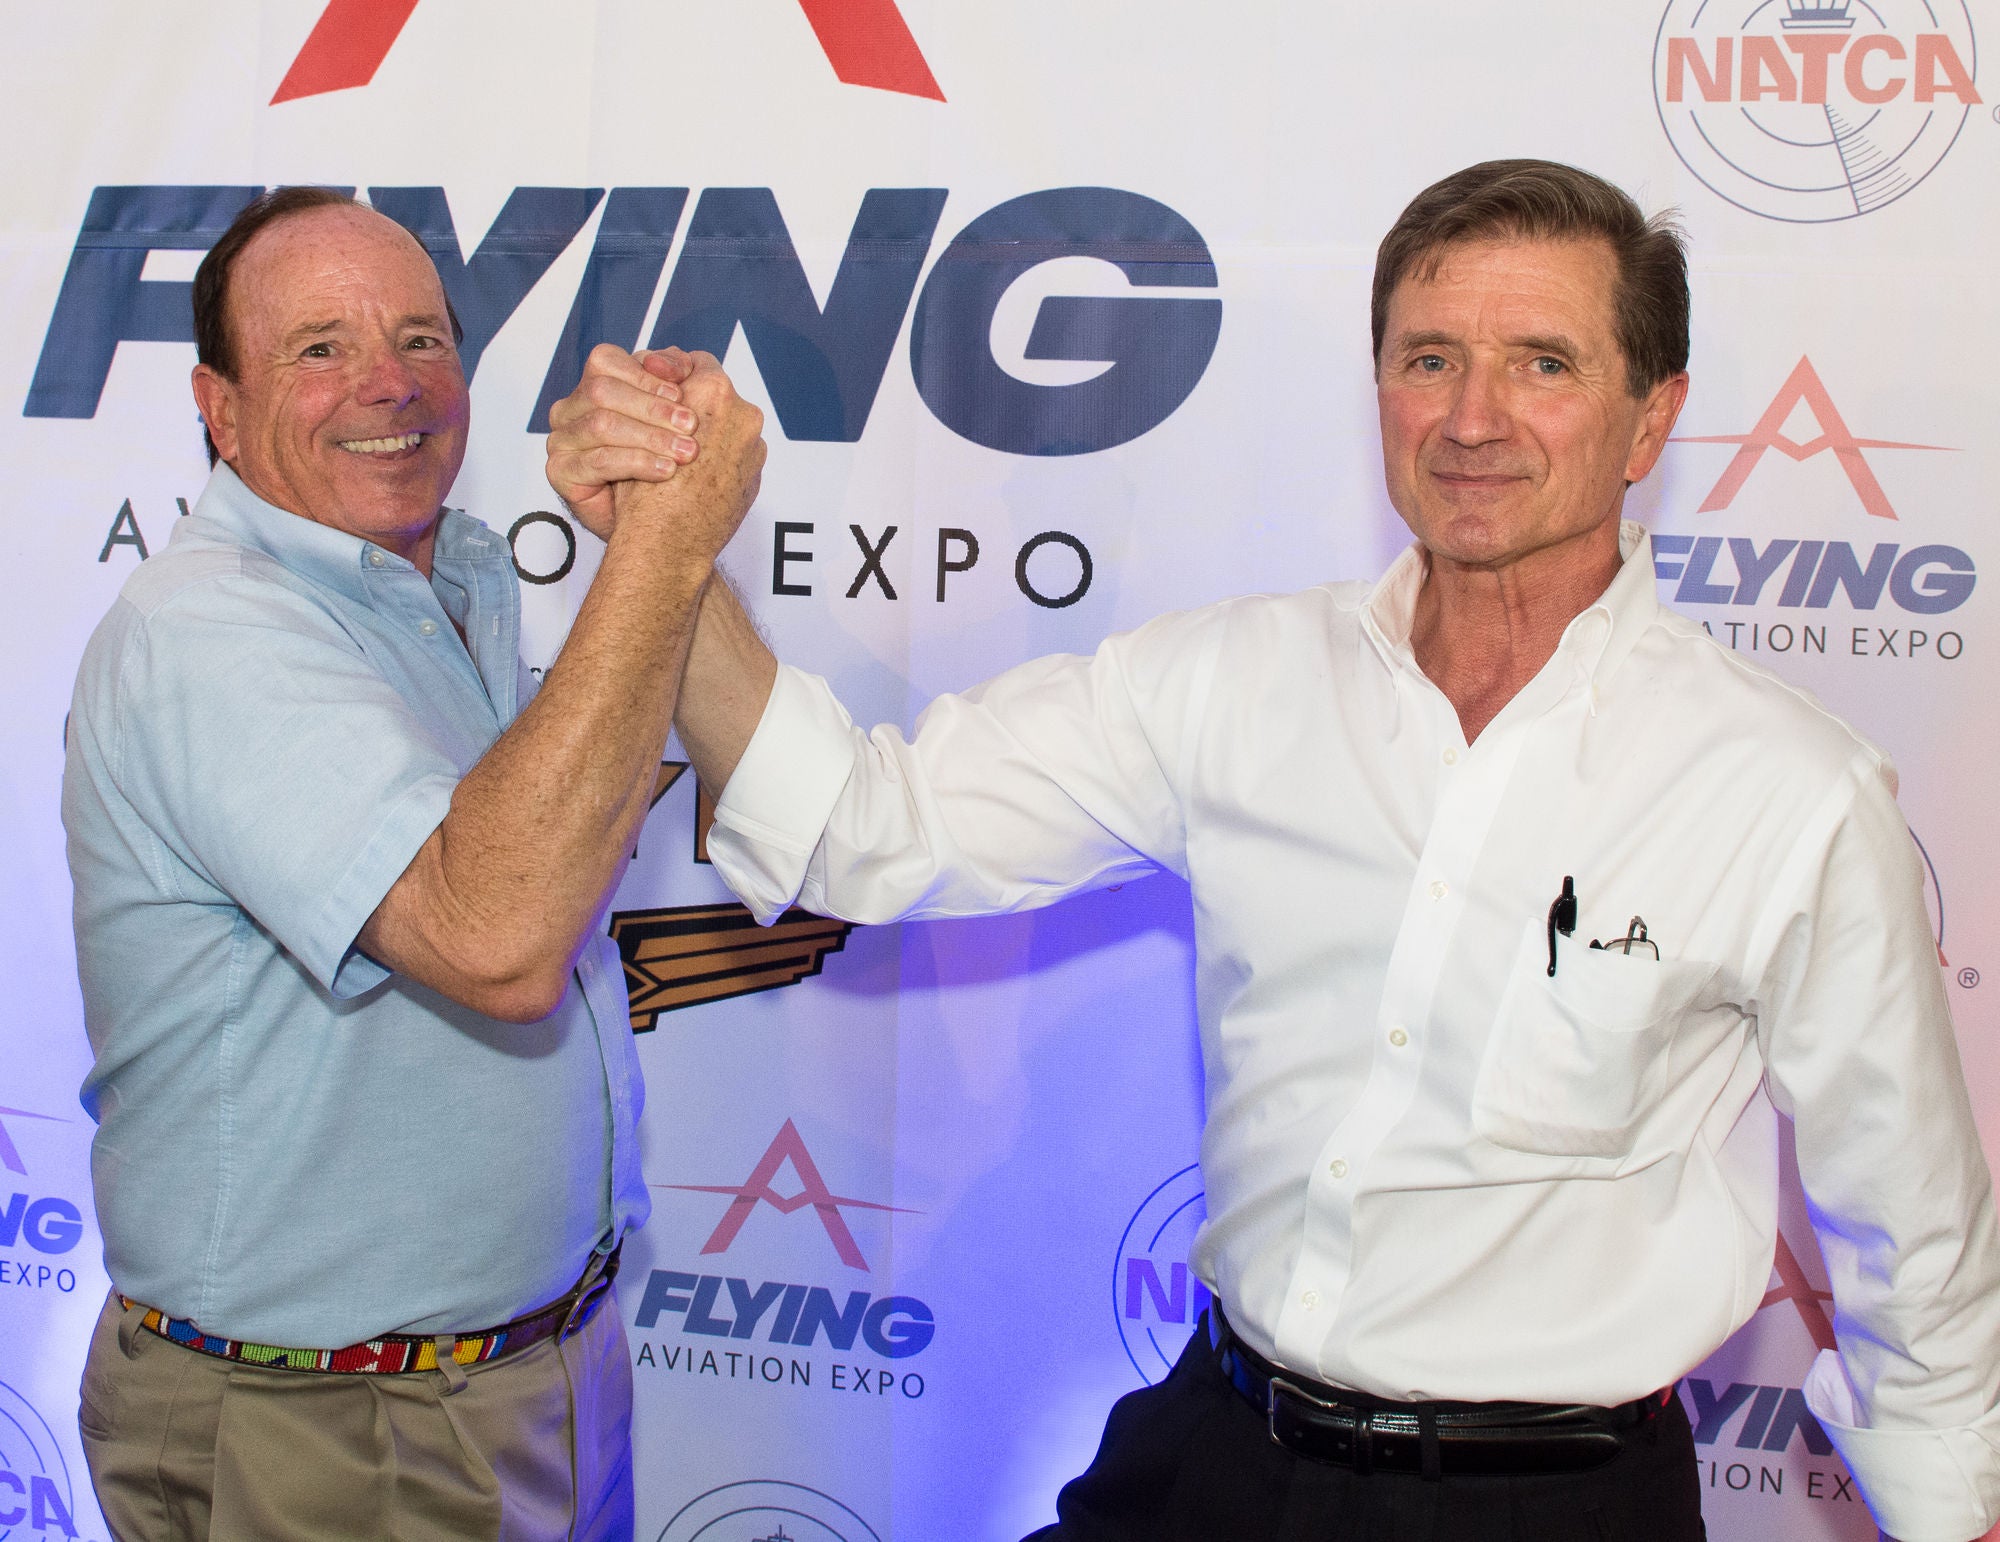 Video: Live ACS Debate at Flying Aviation Expo